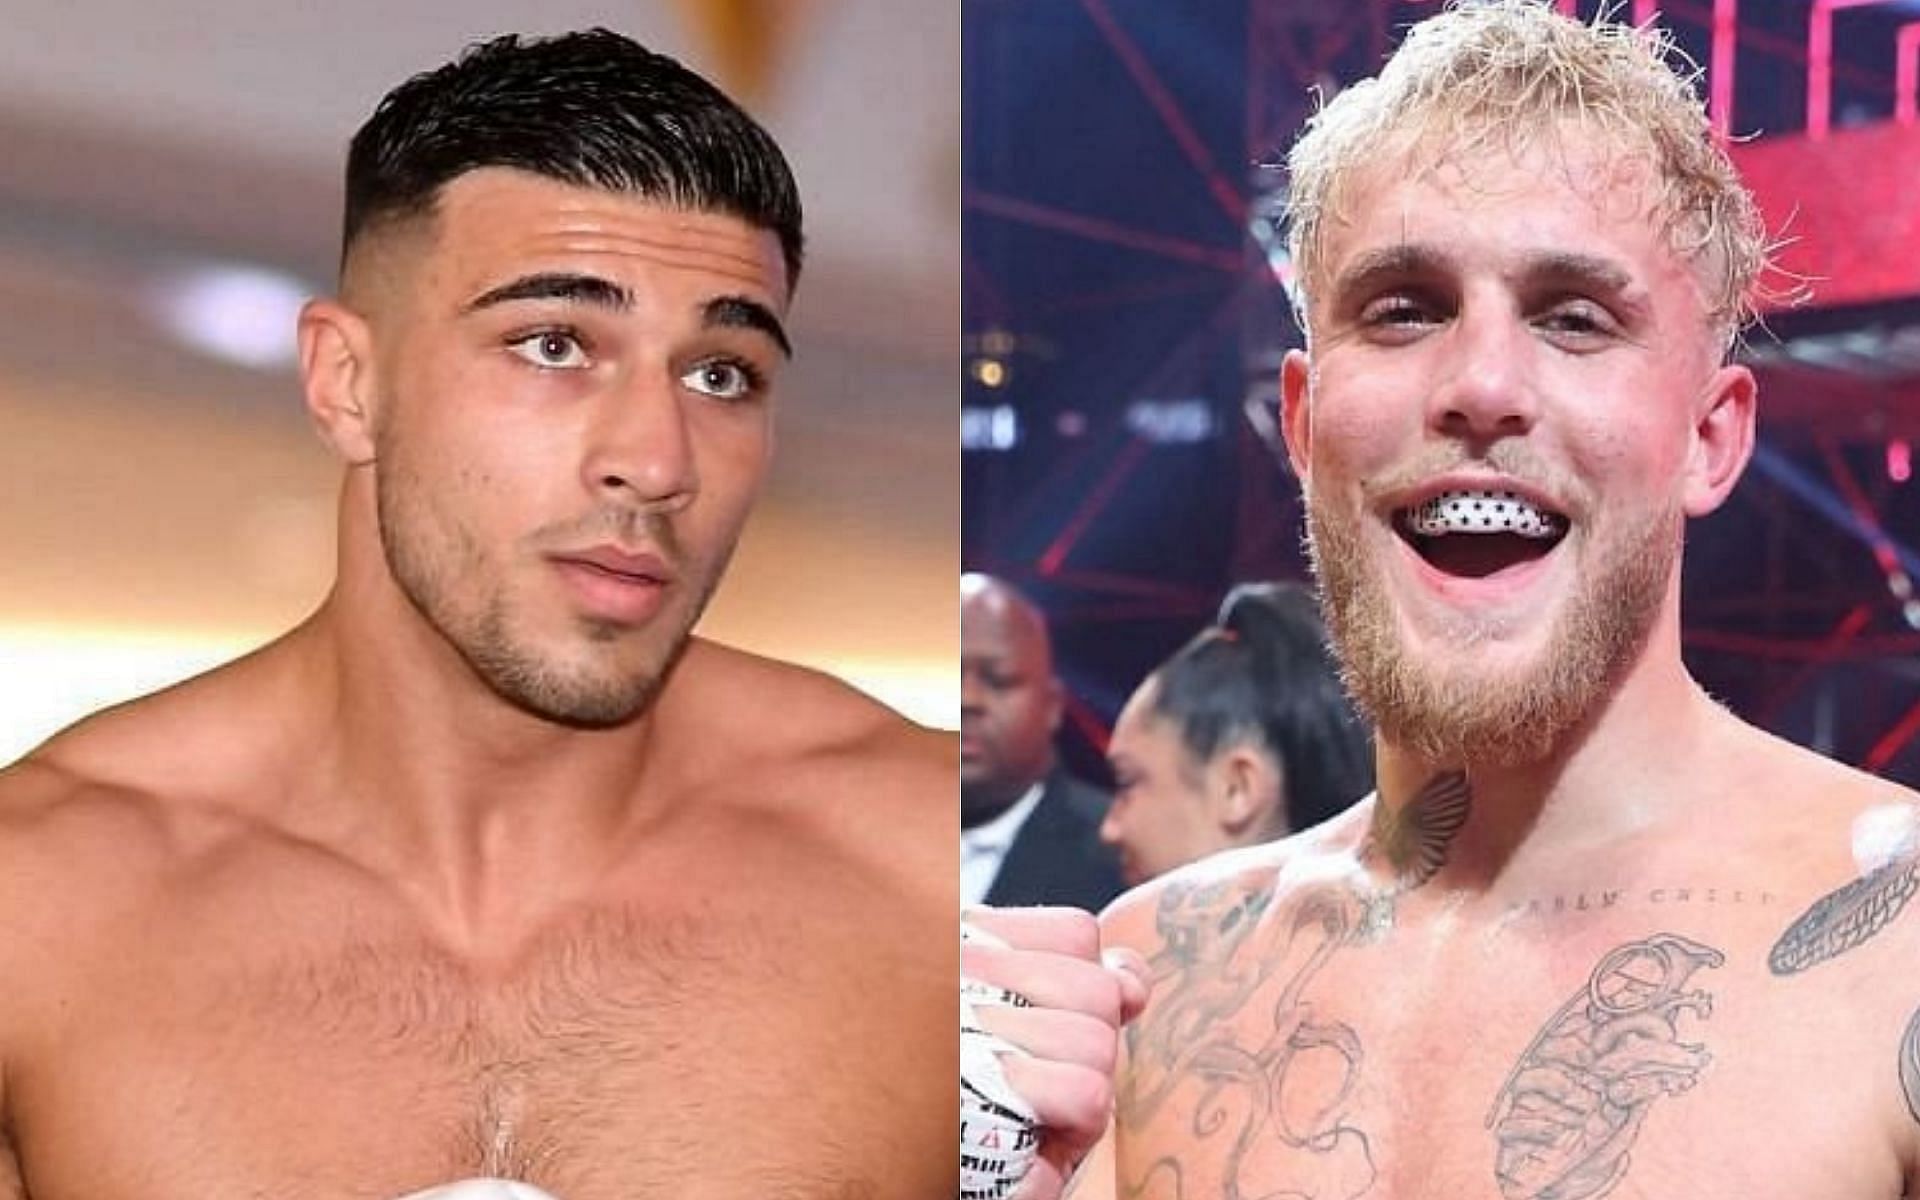 Tommy Fury and Jake Paul were scheduled to fight on December 18th